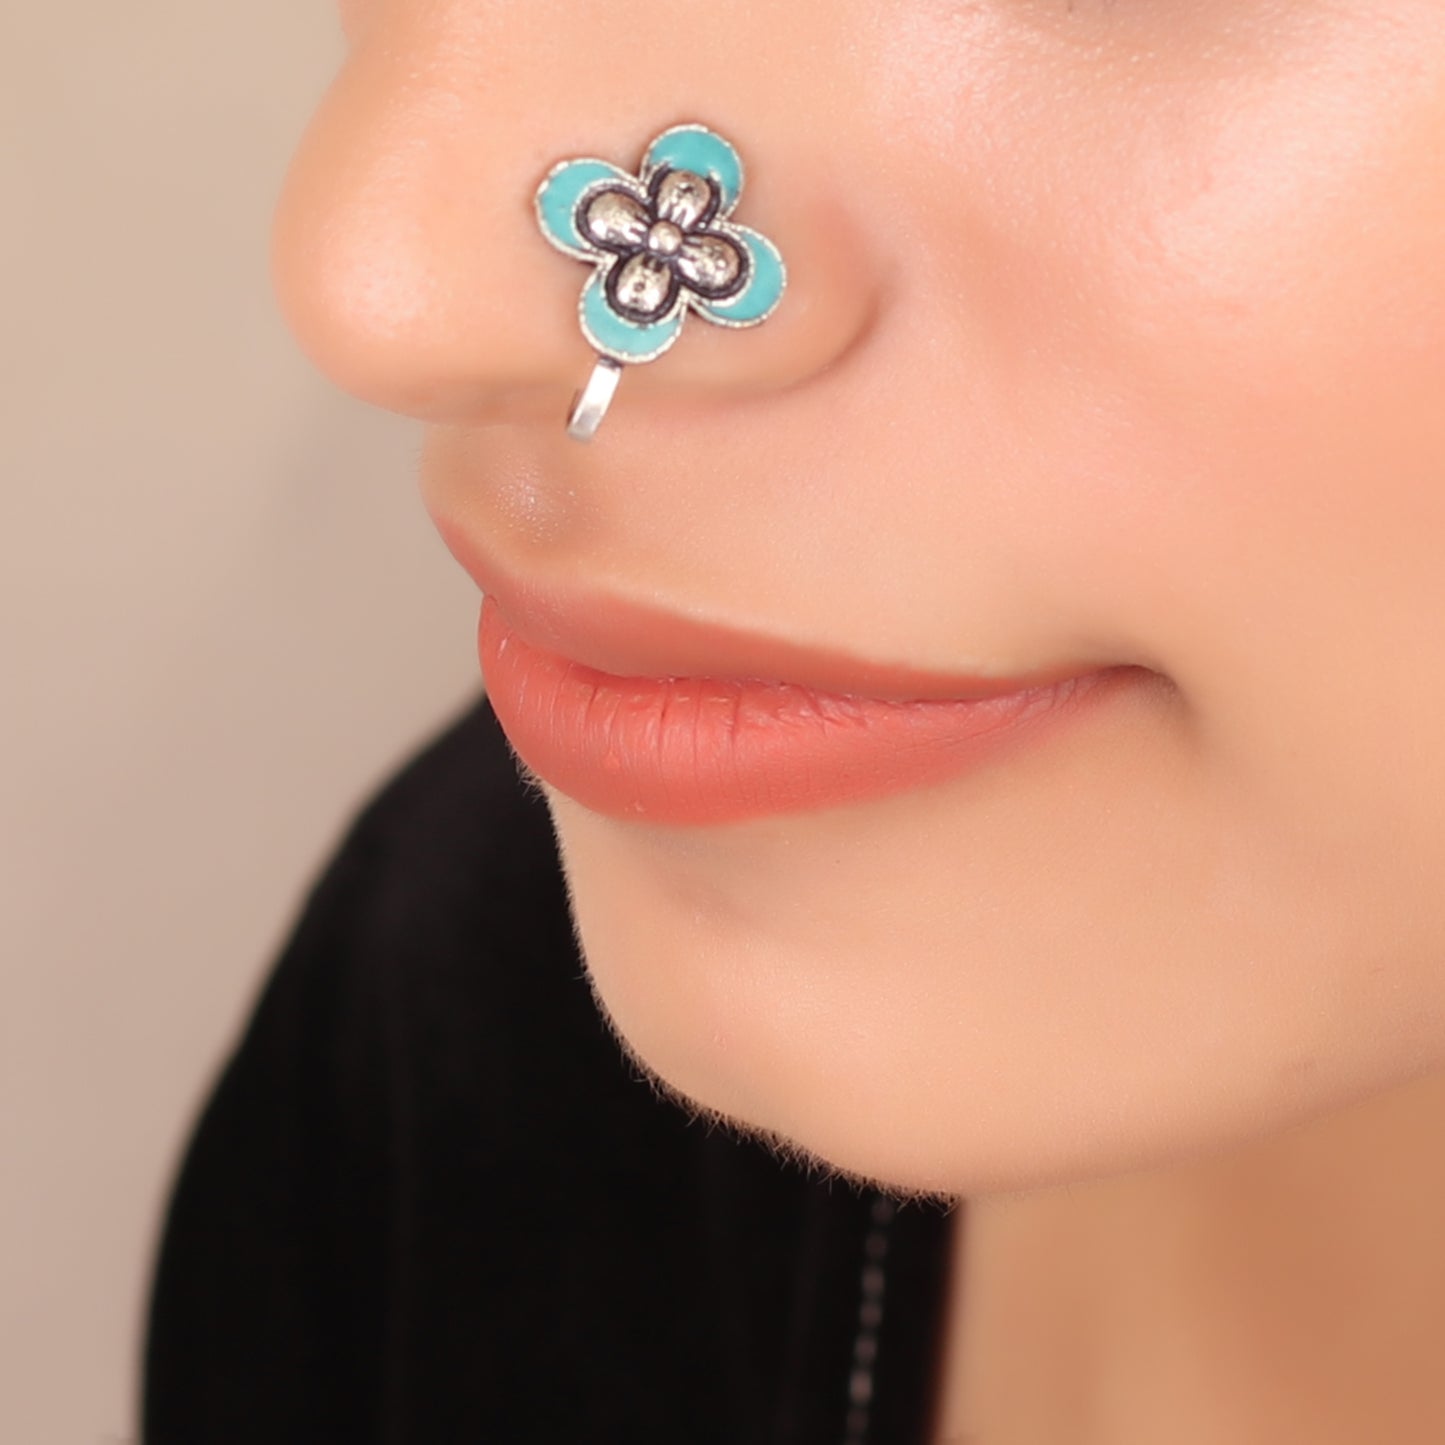 The Butterfly Nose Pin in Turquoise Blue